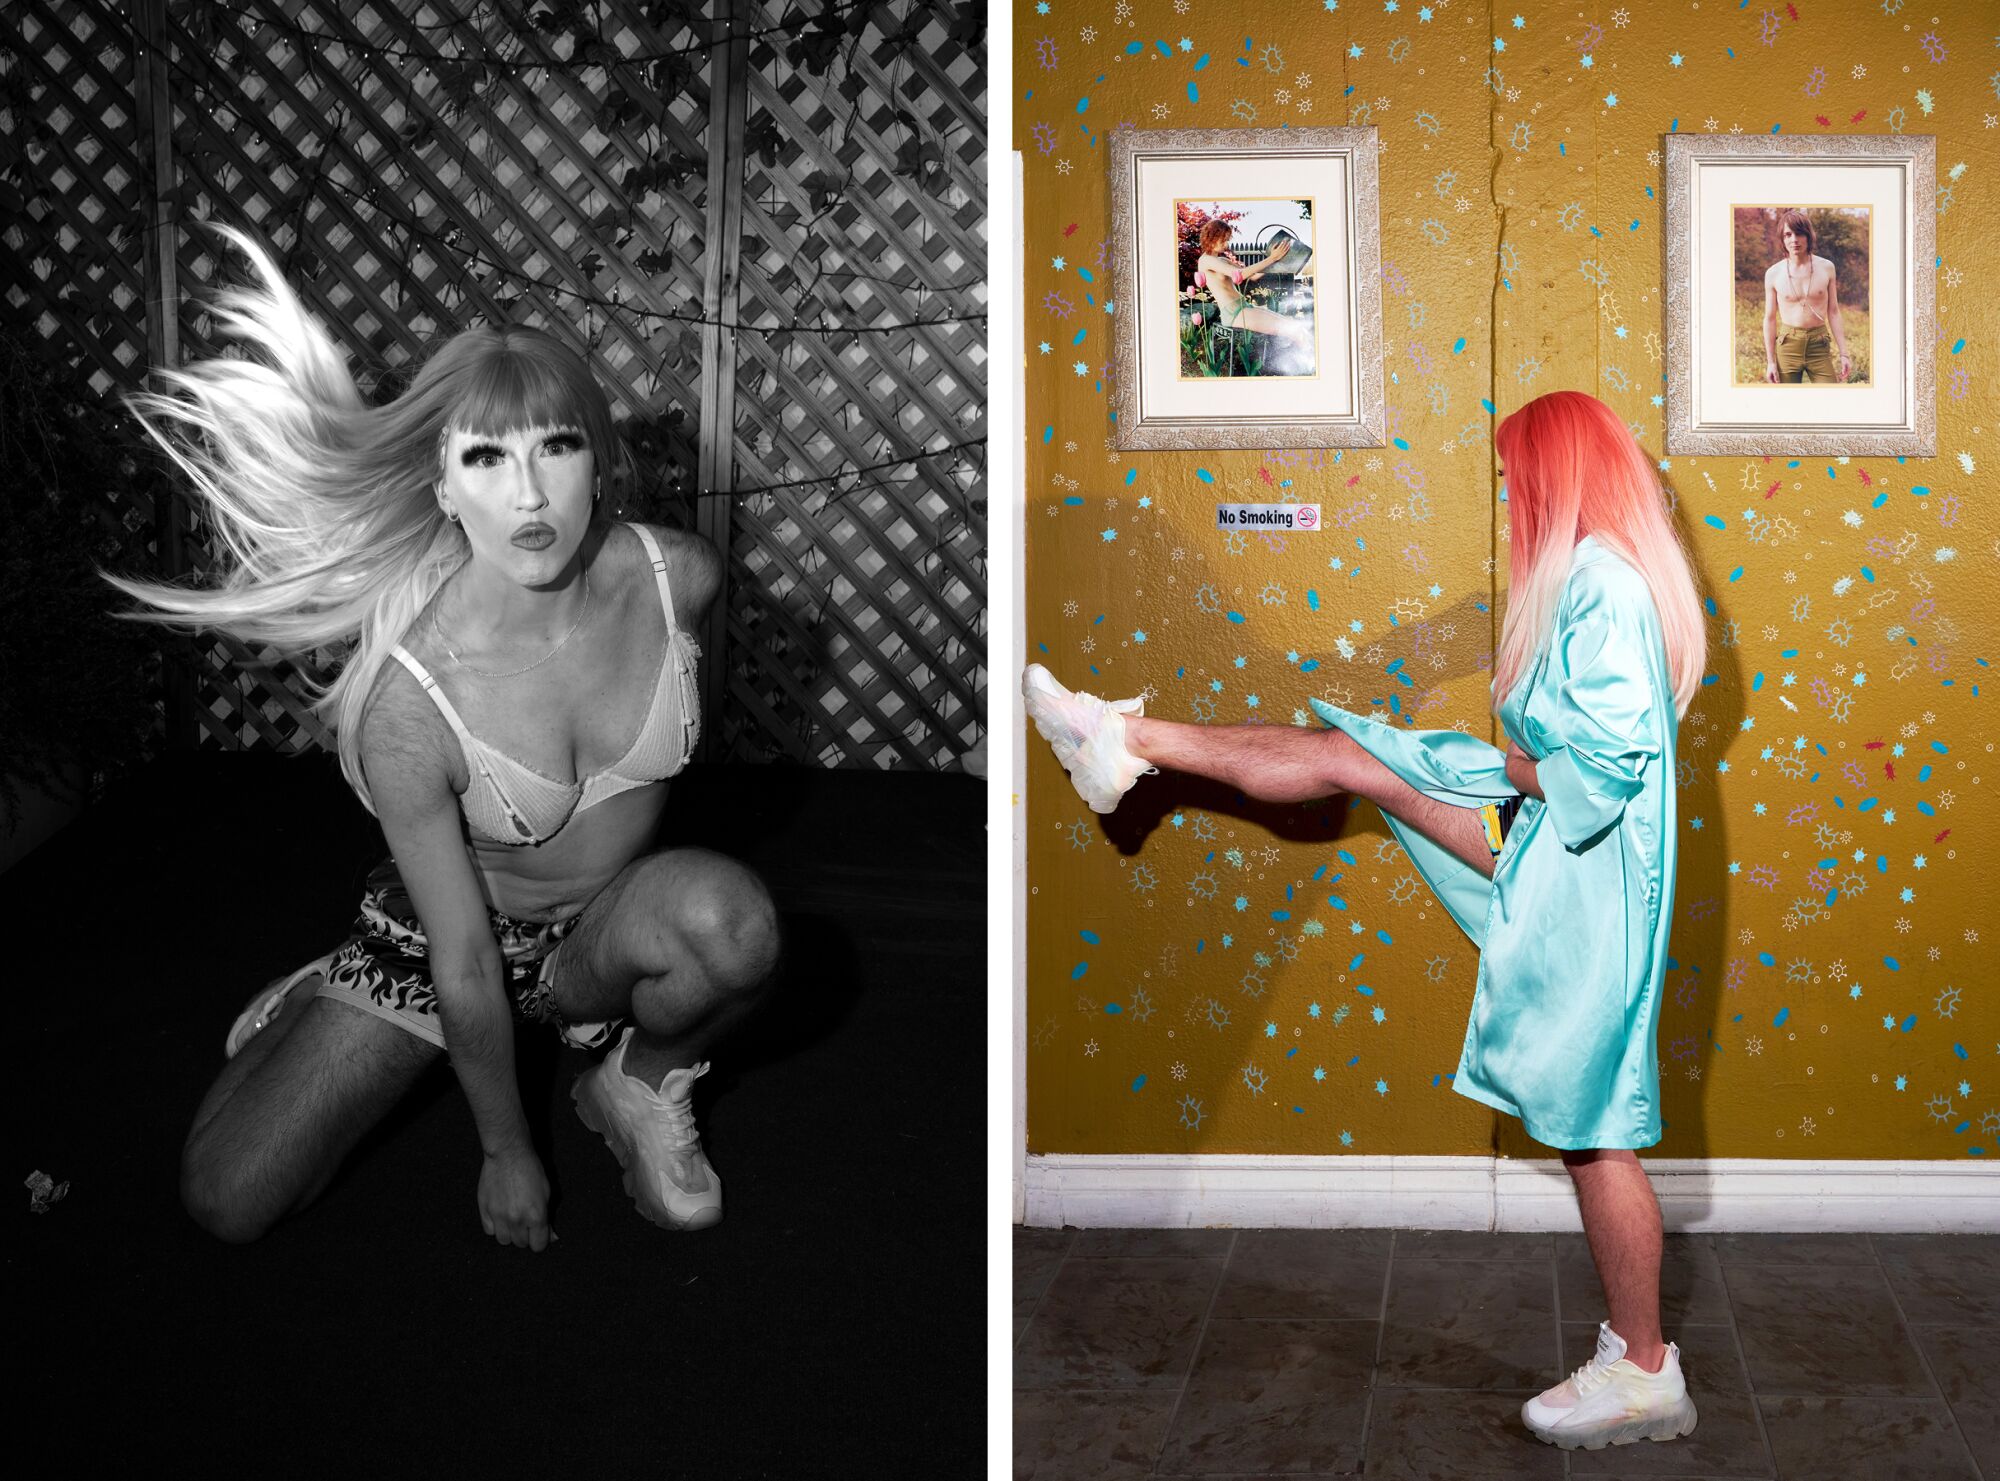 Left, a black-and-white photo of a person in drag kneeling; right, the person in a blue bathrobe backstage, stretching